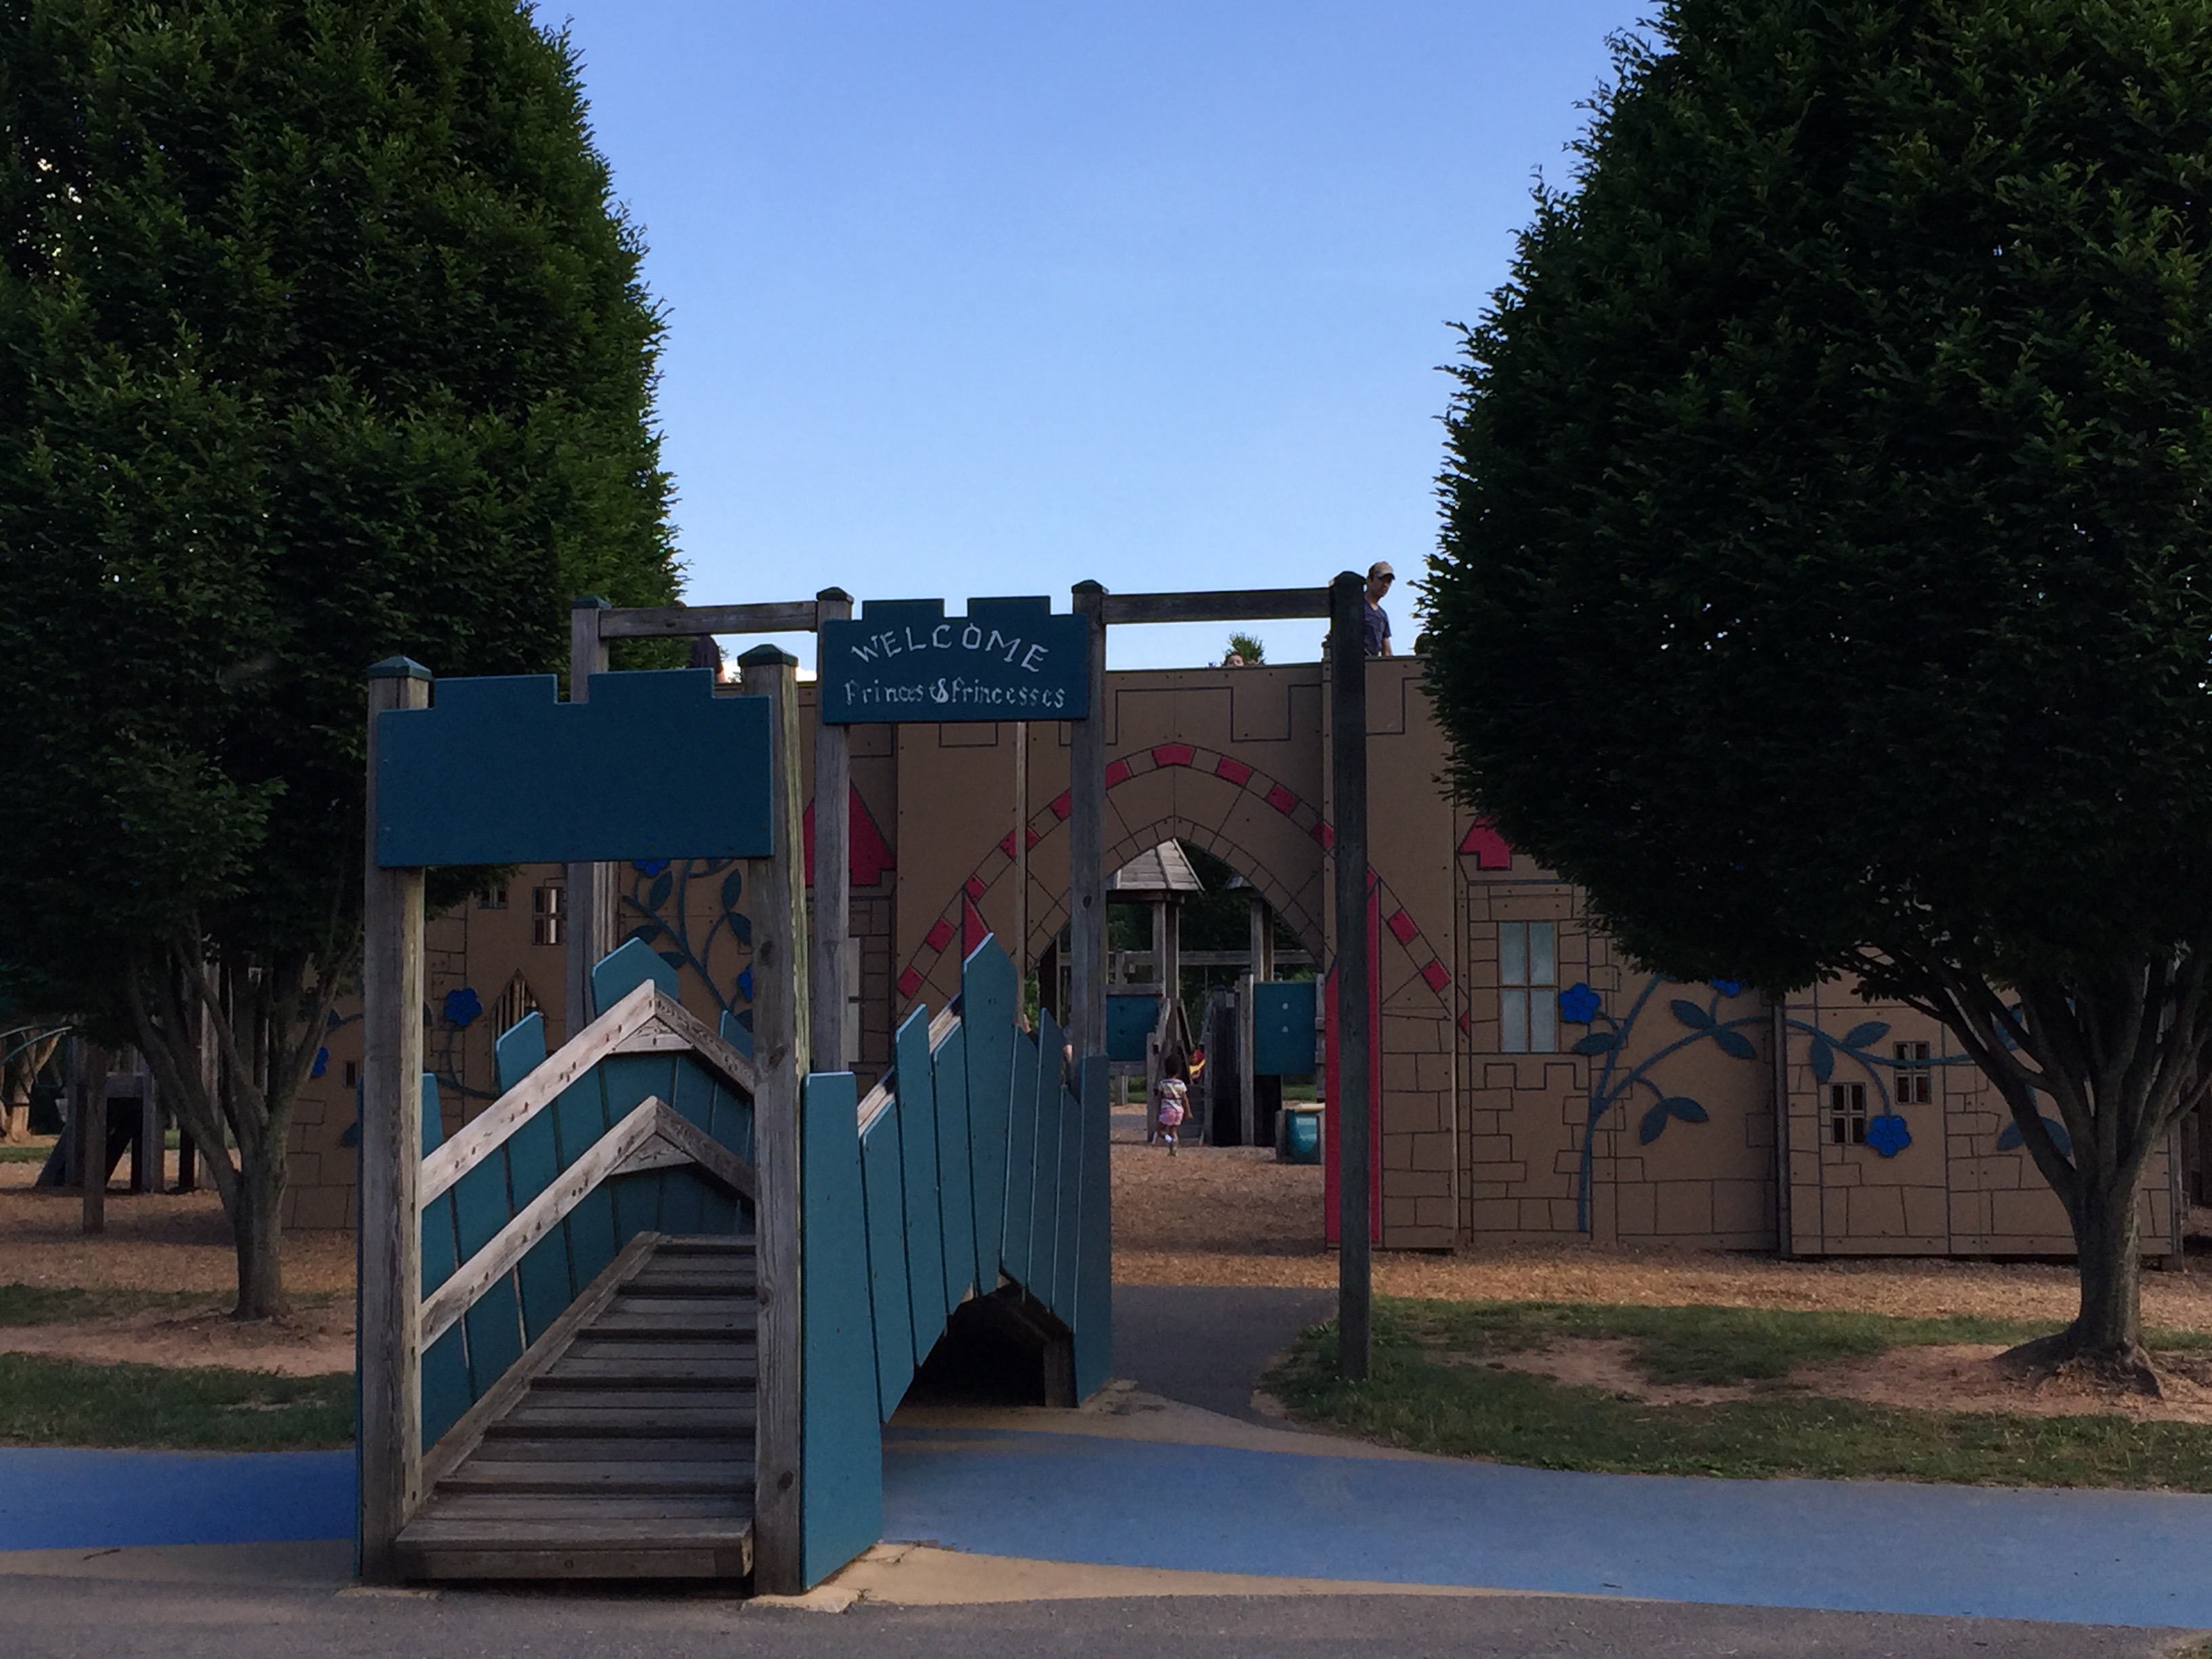 A mock bridge over a moat and castle structure at the South Germantown Adventure Playground